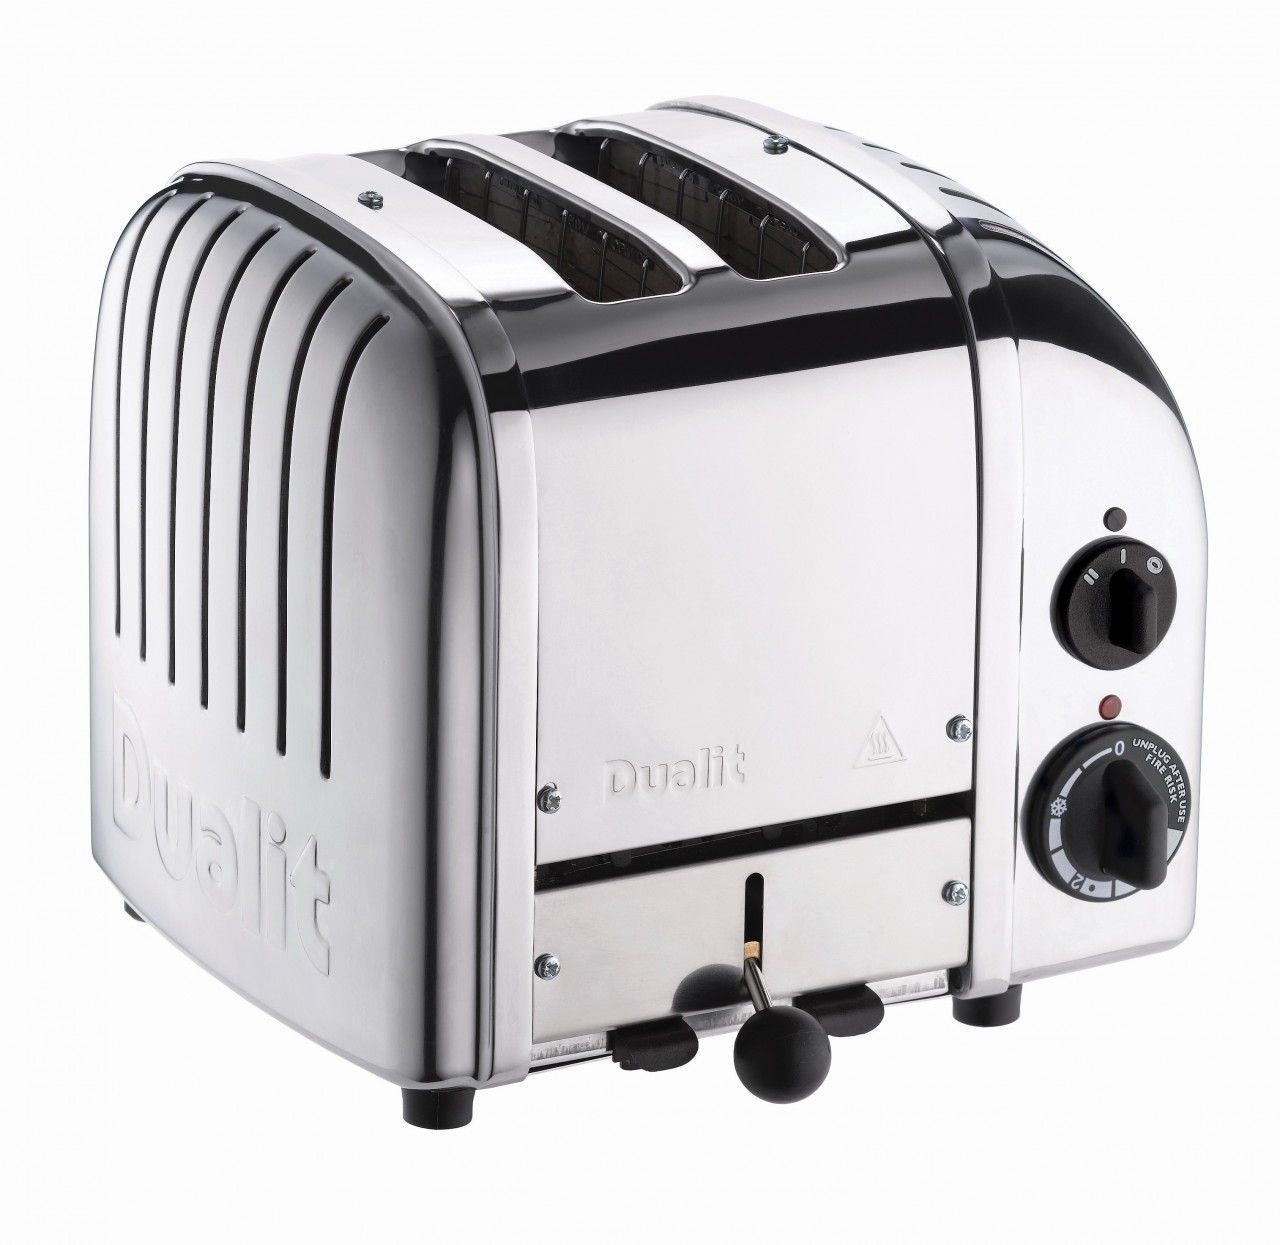 Dualit Classic 2er-Toaster-Poliertes Metall